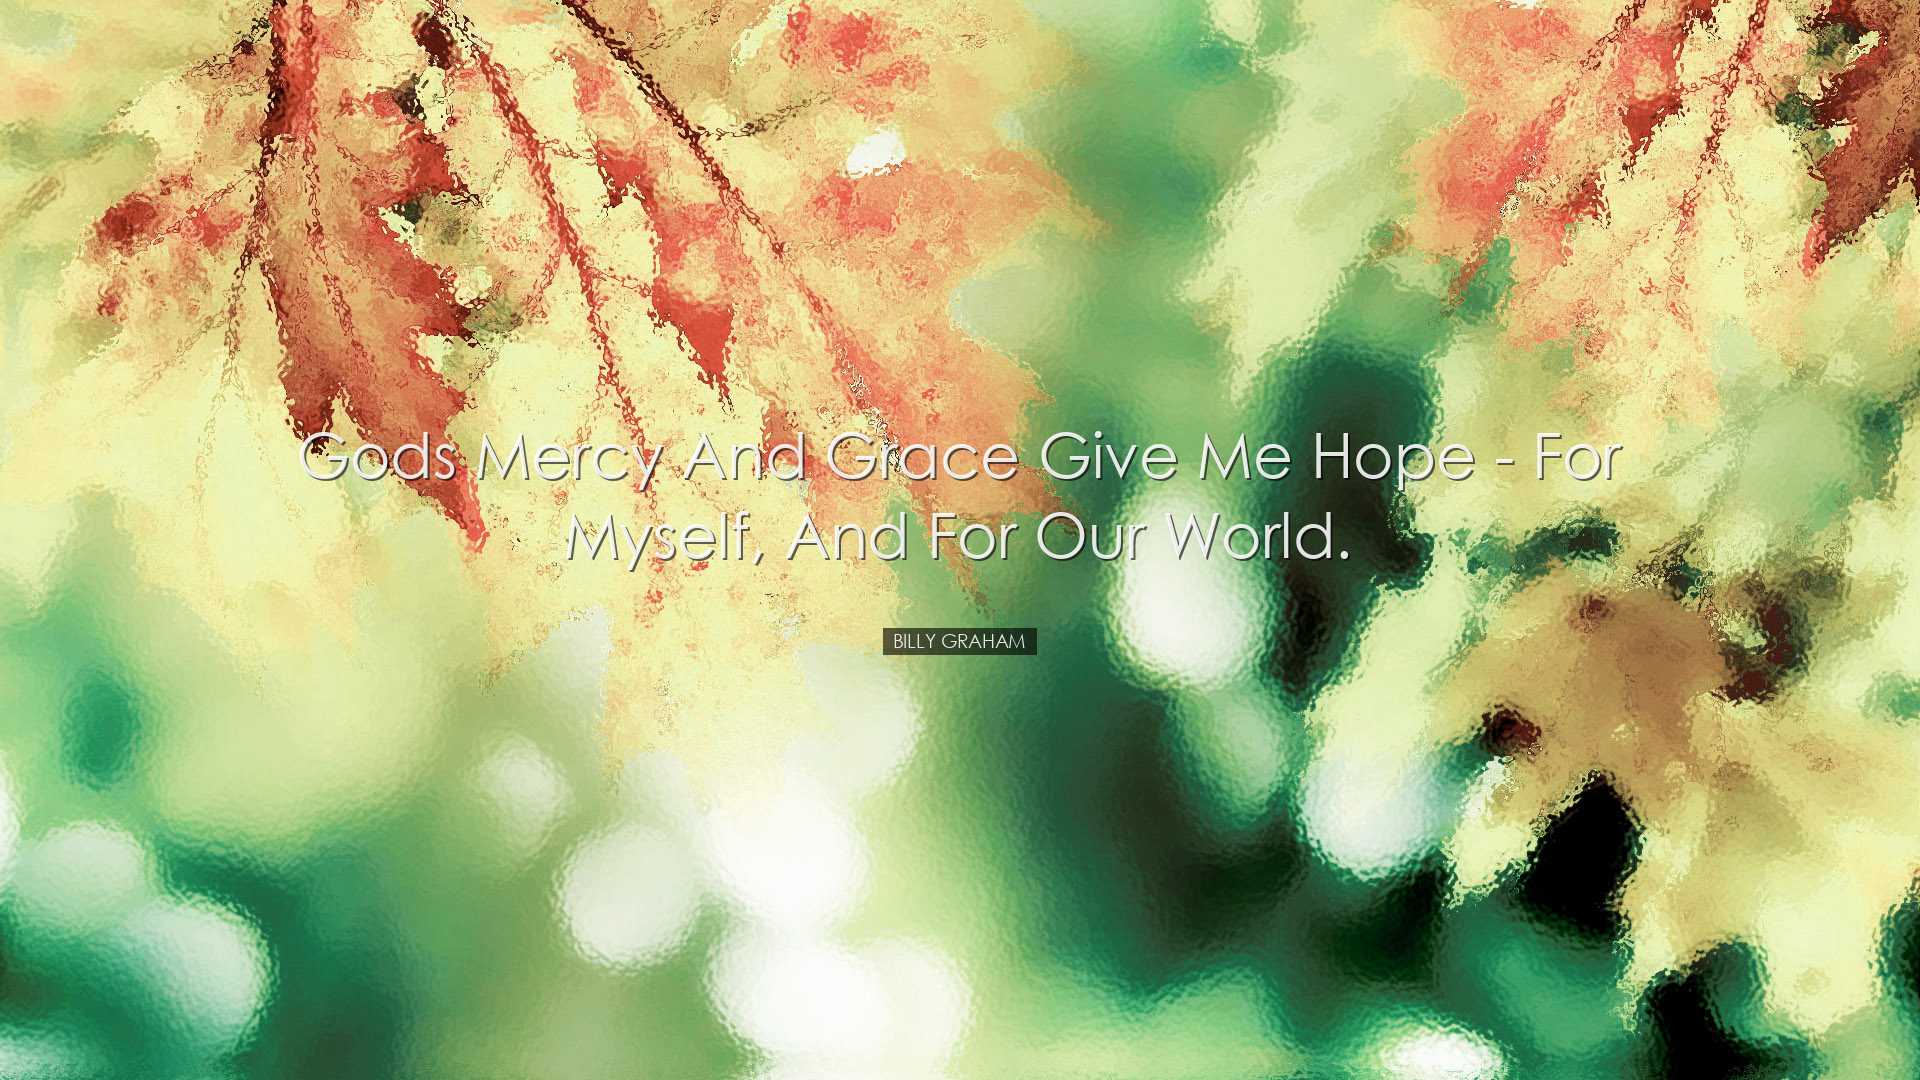 Gods mercy and grace give me hope - for myself, and for our world.